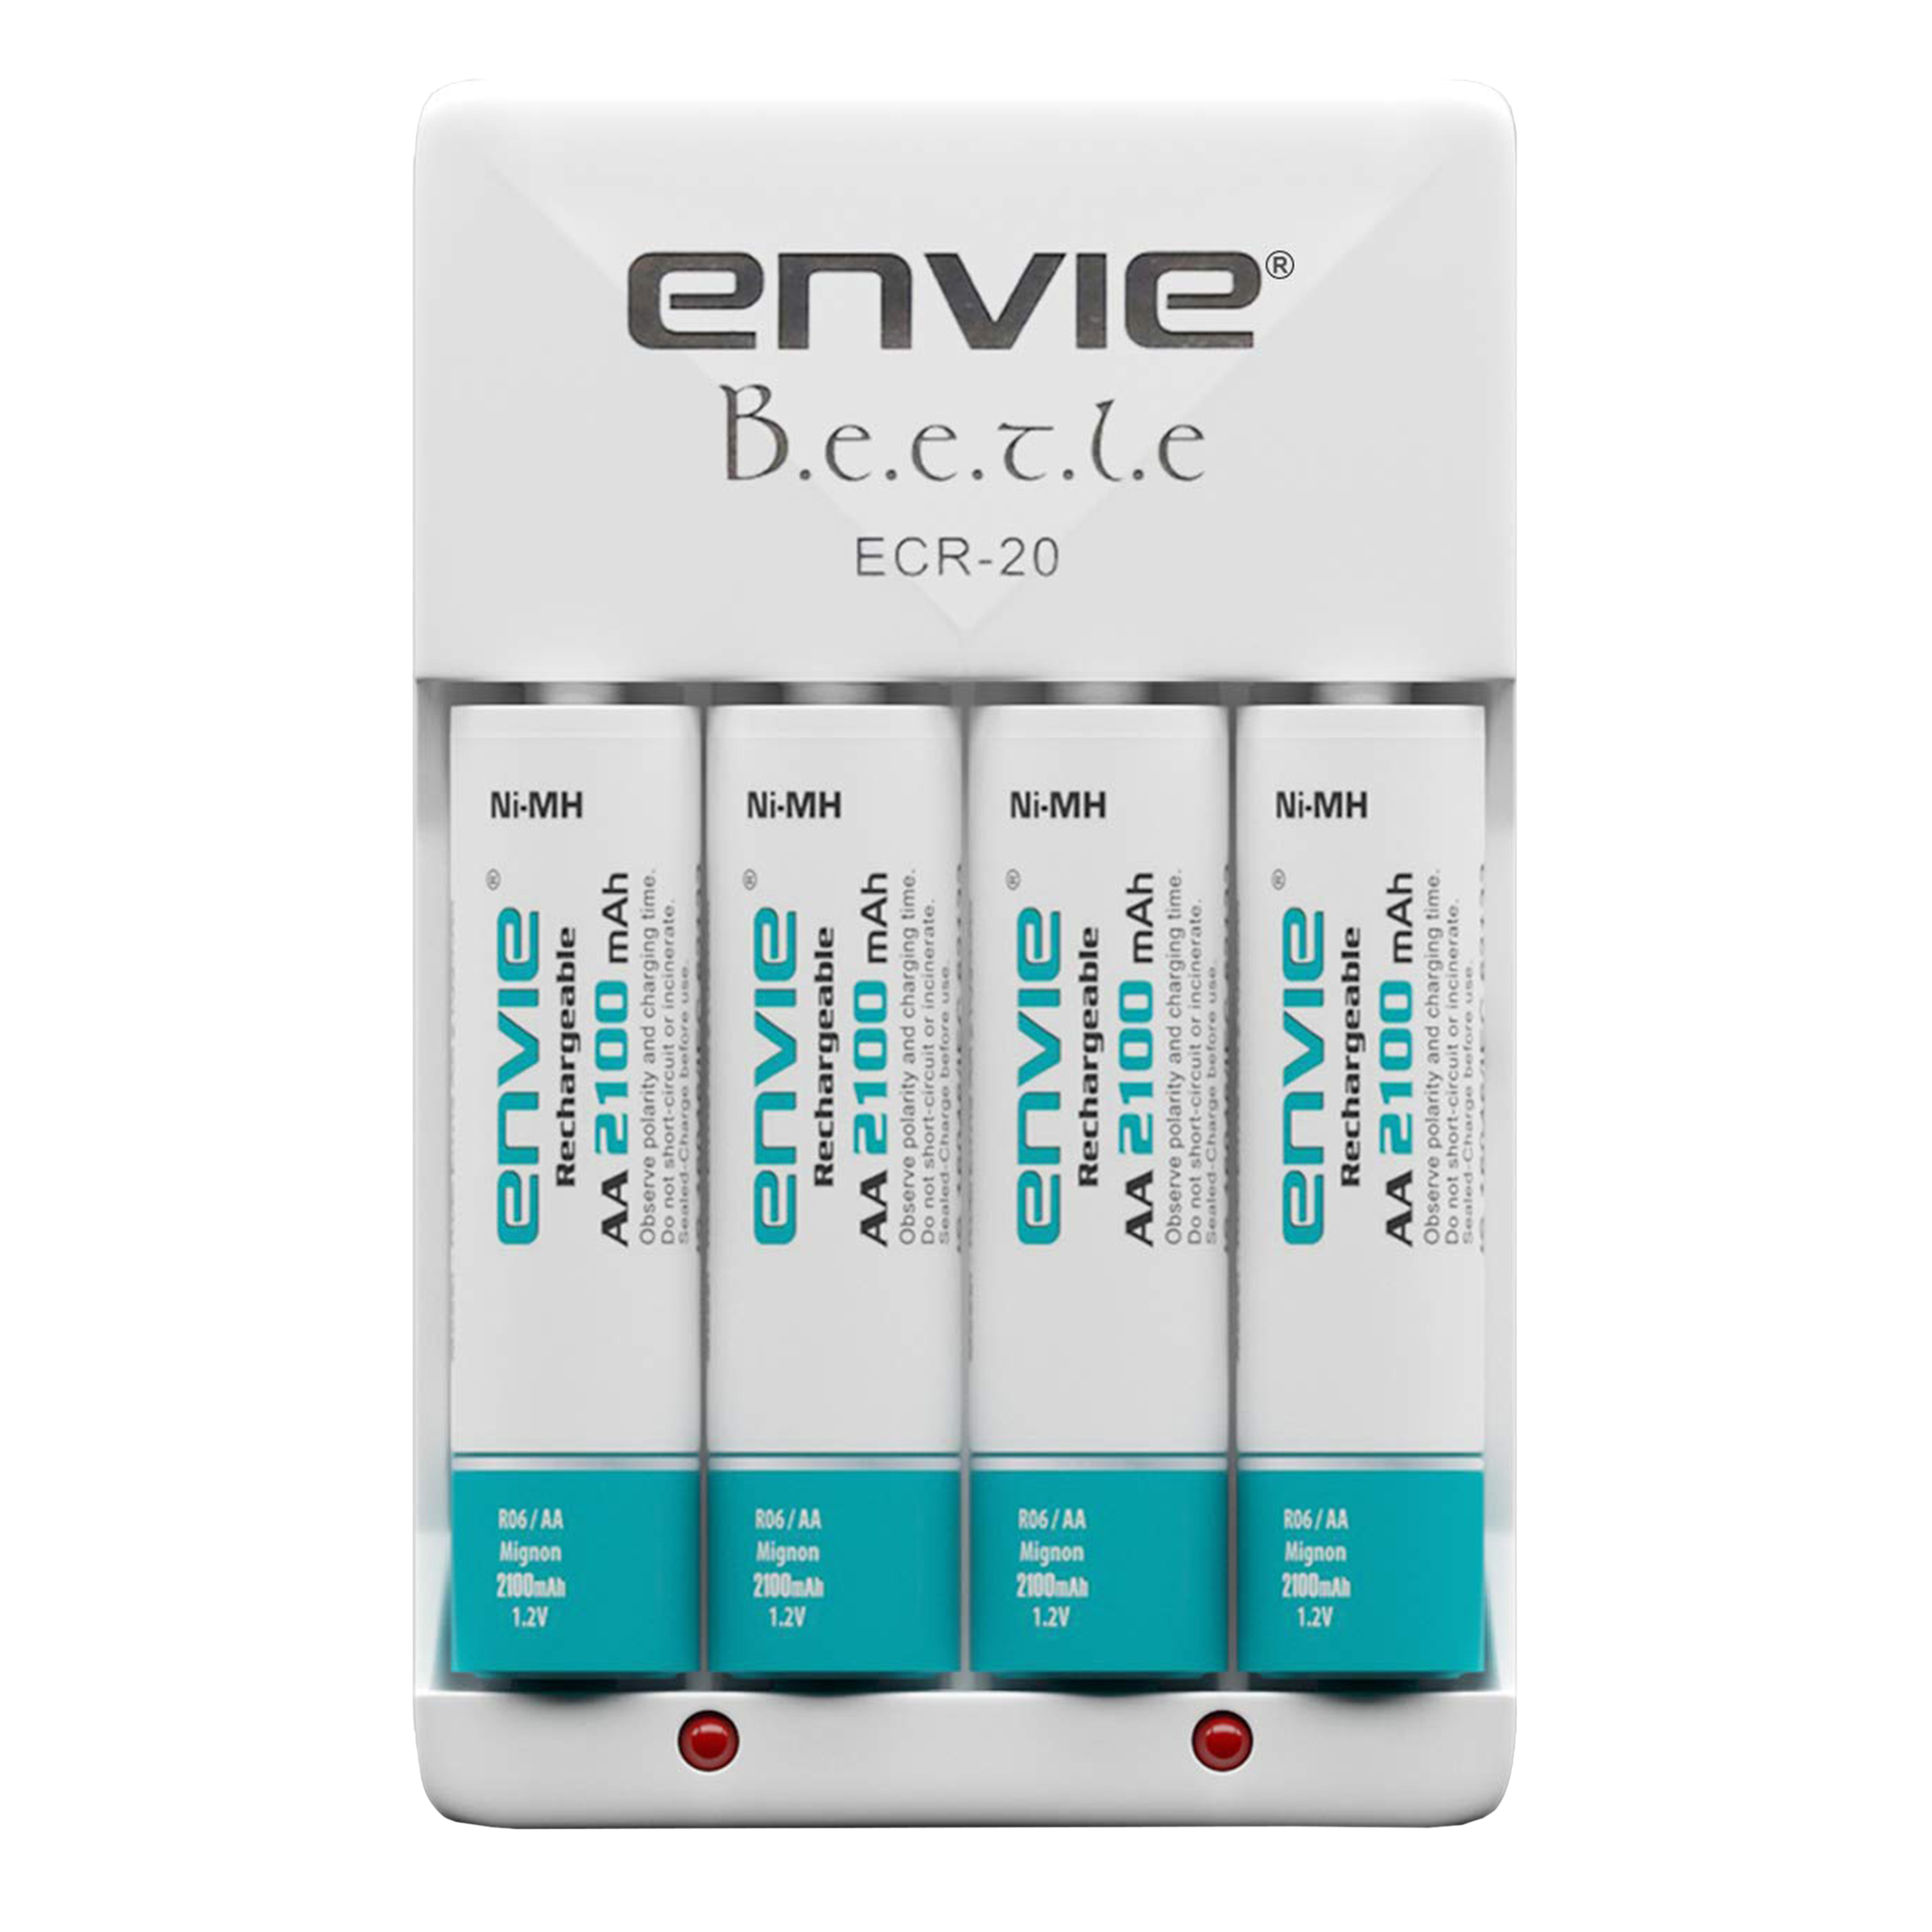 envie Beetle ECR-20 Camera Battery Charger Combo for AA28004PL (4-Ports, Short Circuit Protection)